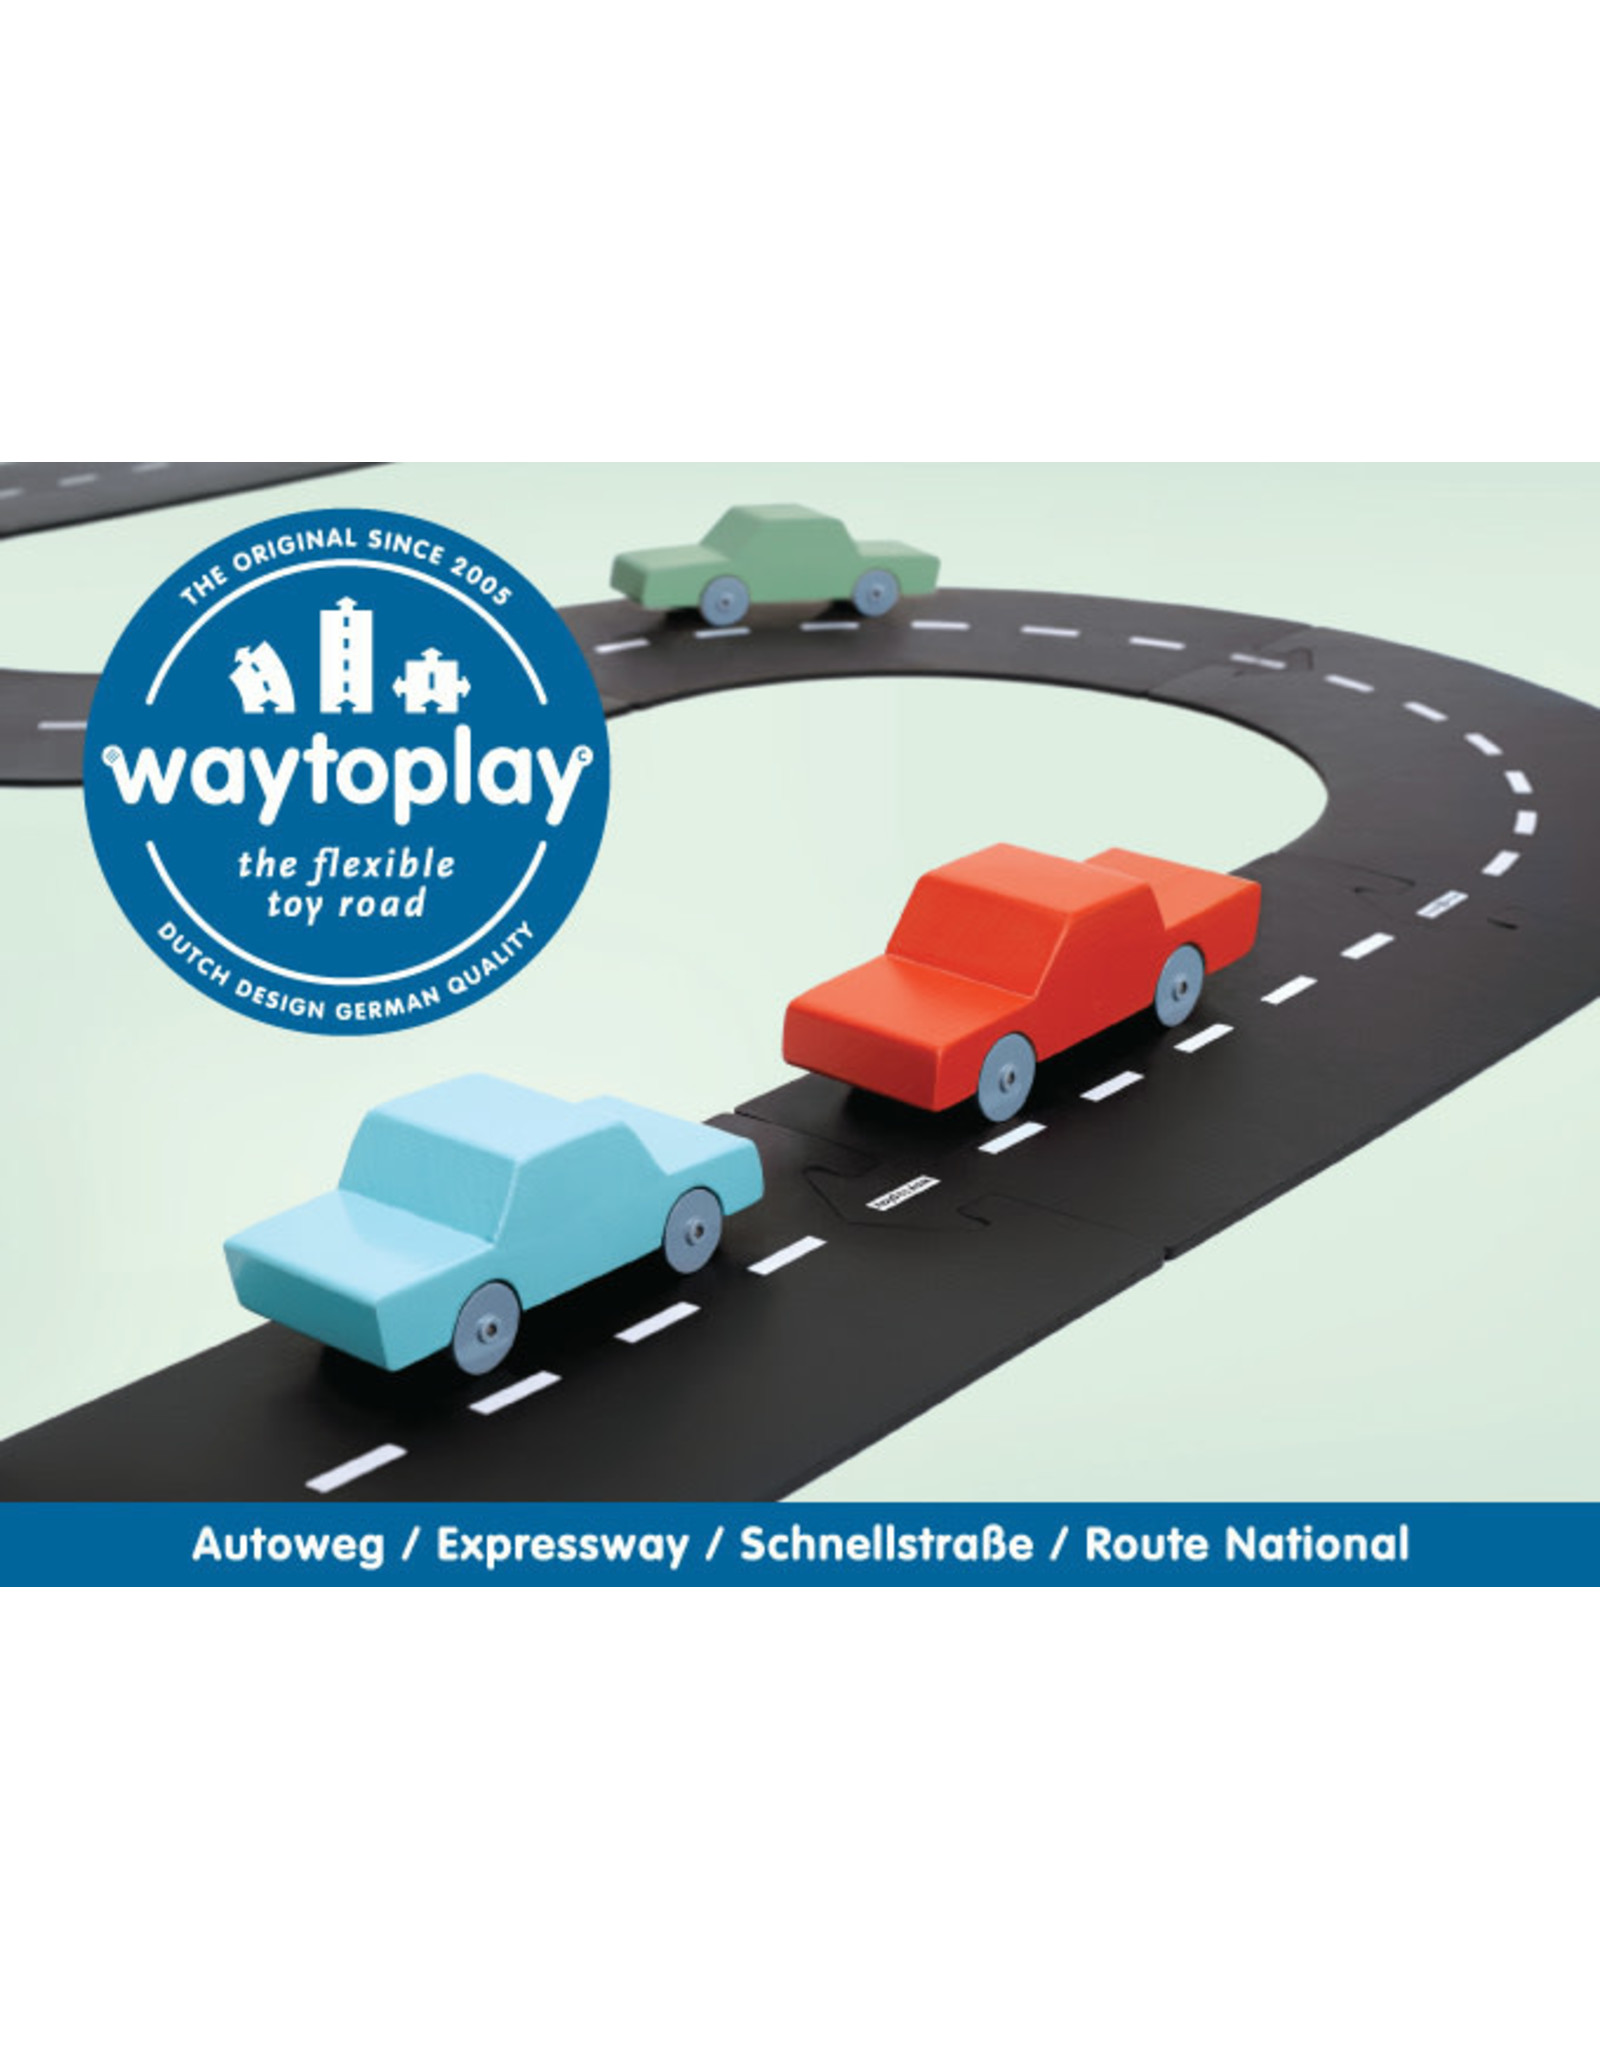 Way to play Circuit Express way / route nationale   - 16 pièces